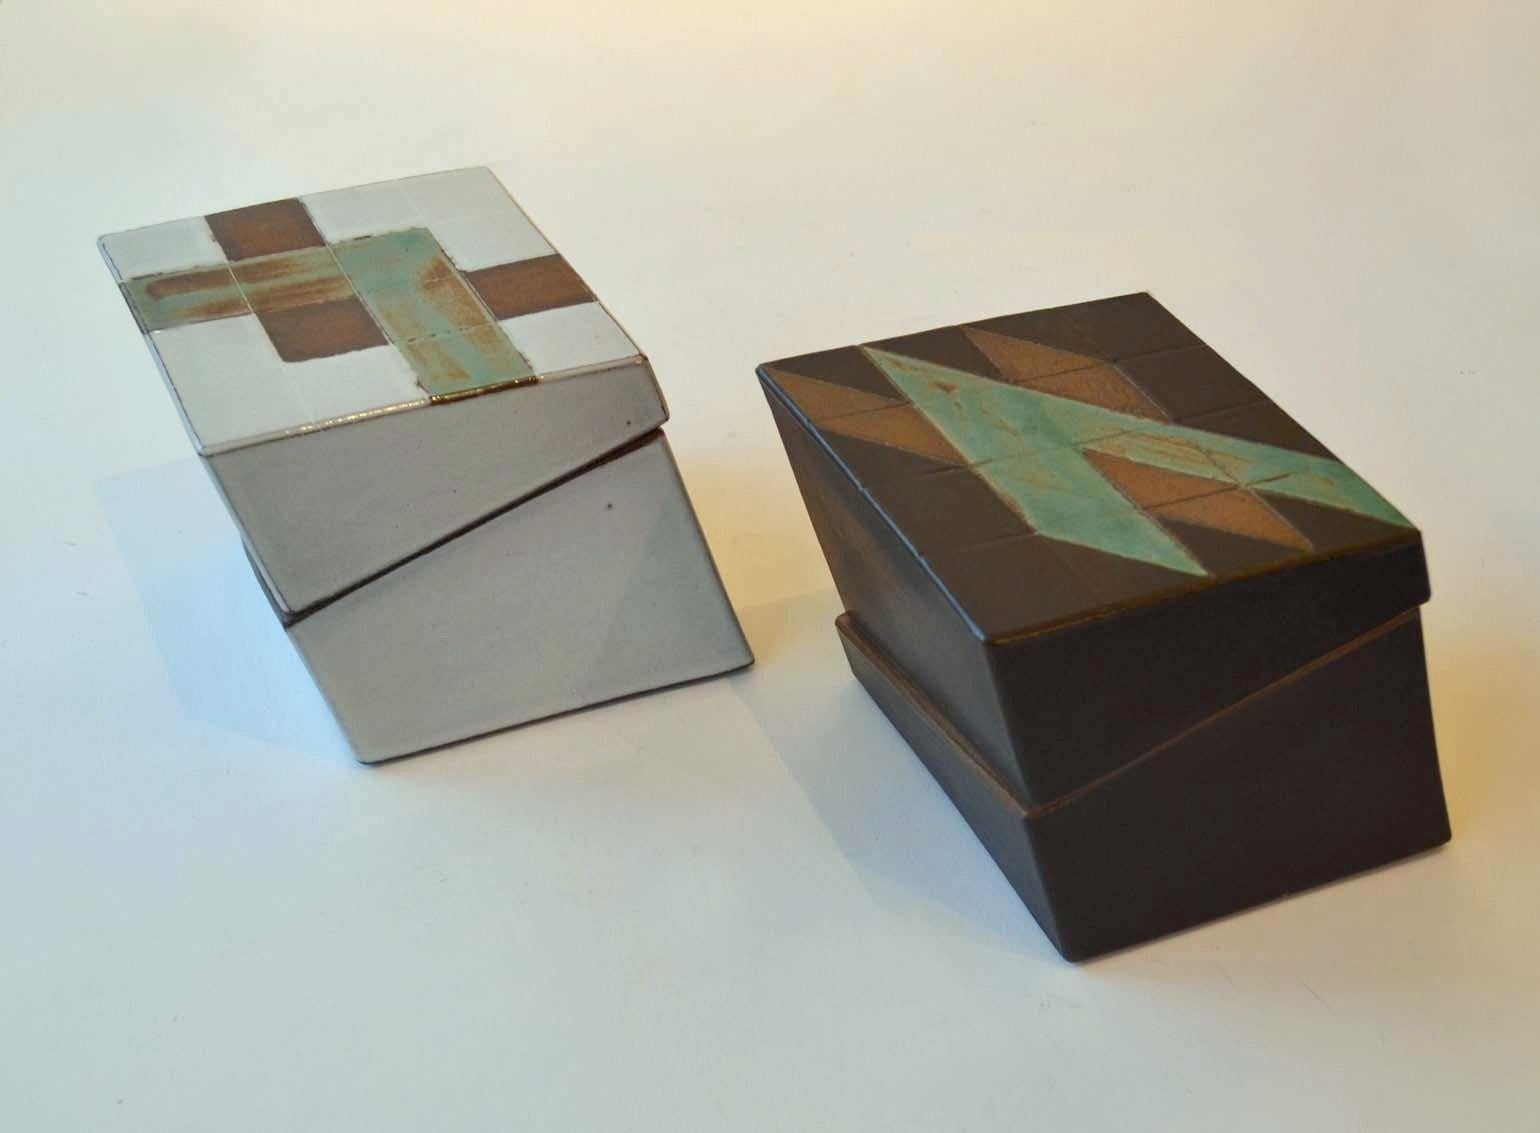 Pair of Square Geometric Ceramic Boxes in Black and White For Sale 5